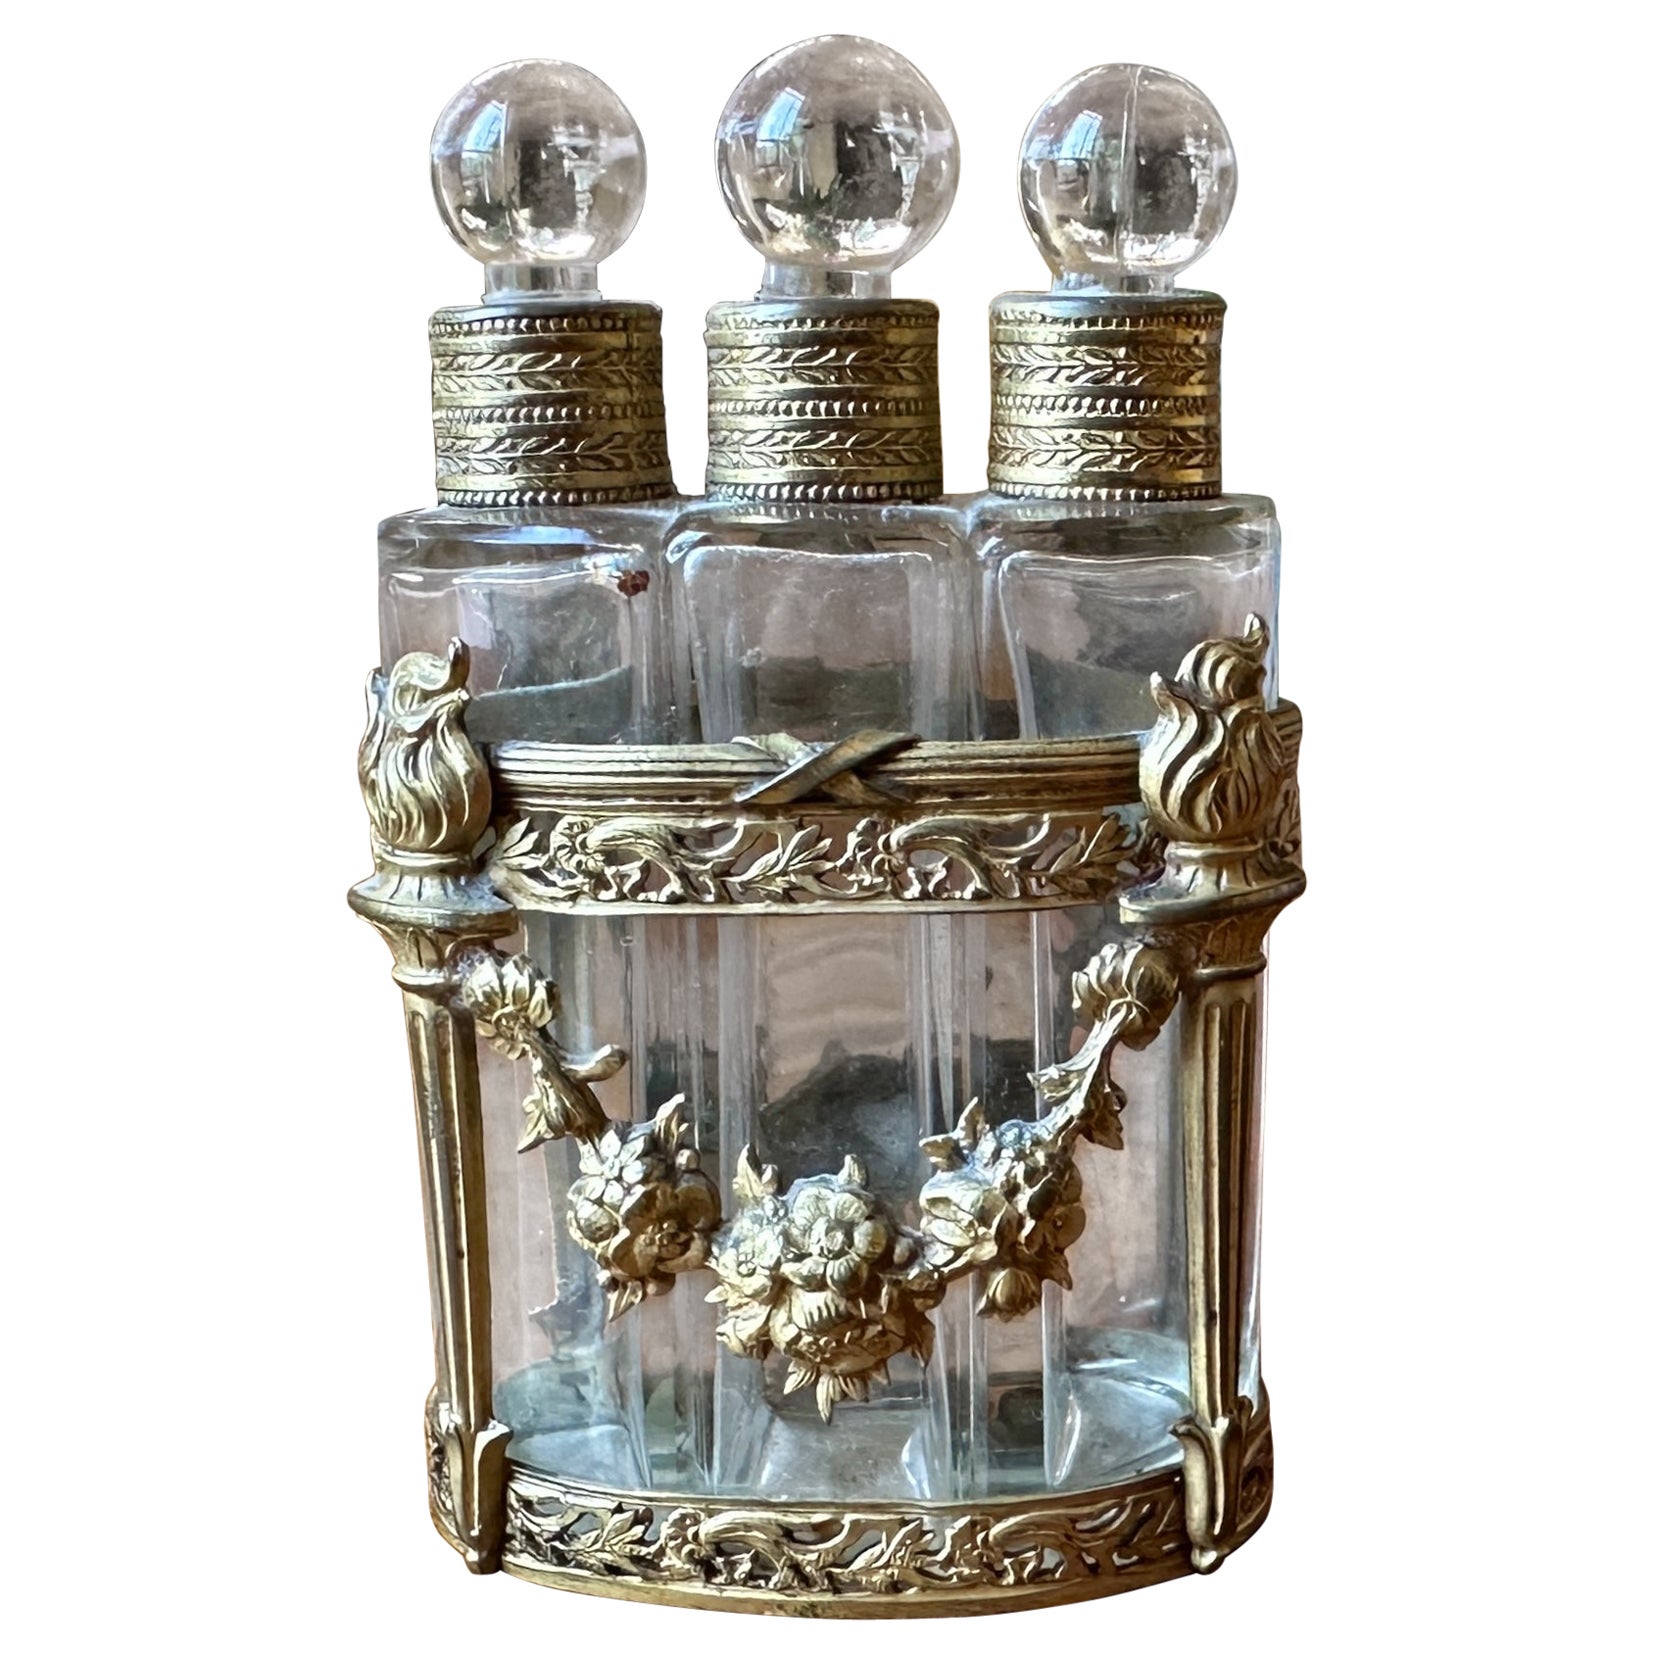 Antique French Bronze Doré Mounted Ormolu Perfume Bottle Caddy Set For Sale